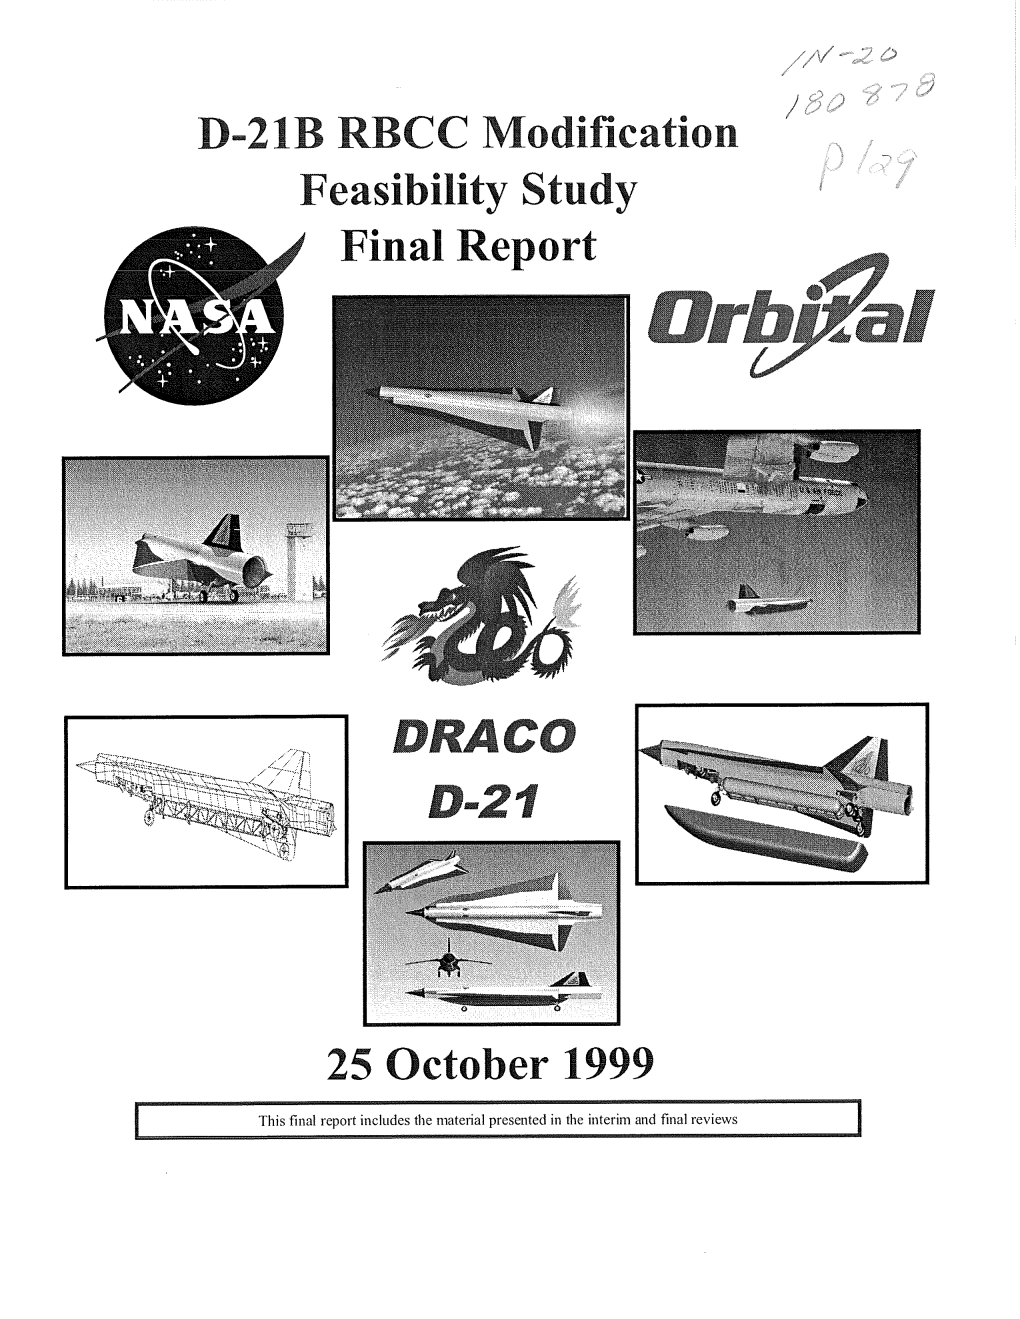 D-21B RBCC Modification Feasibility Study 25 October 1999